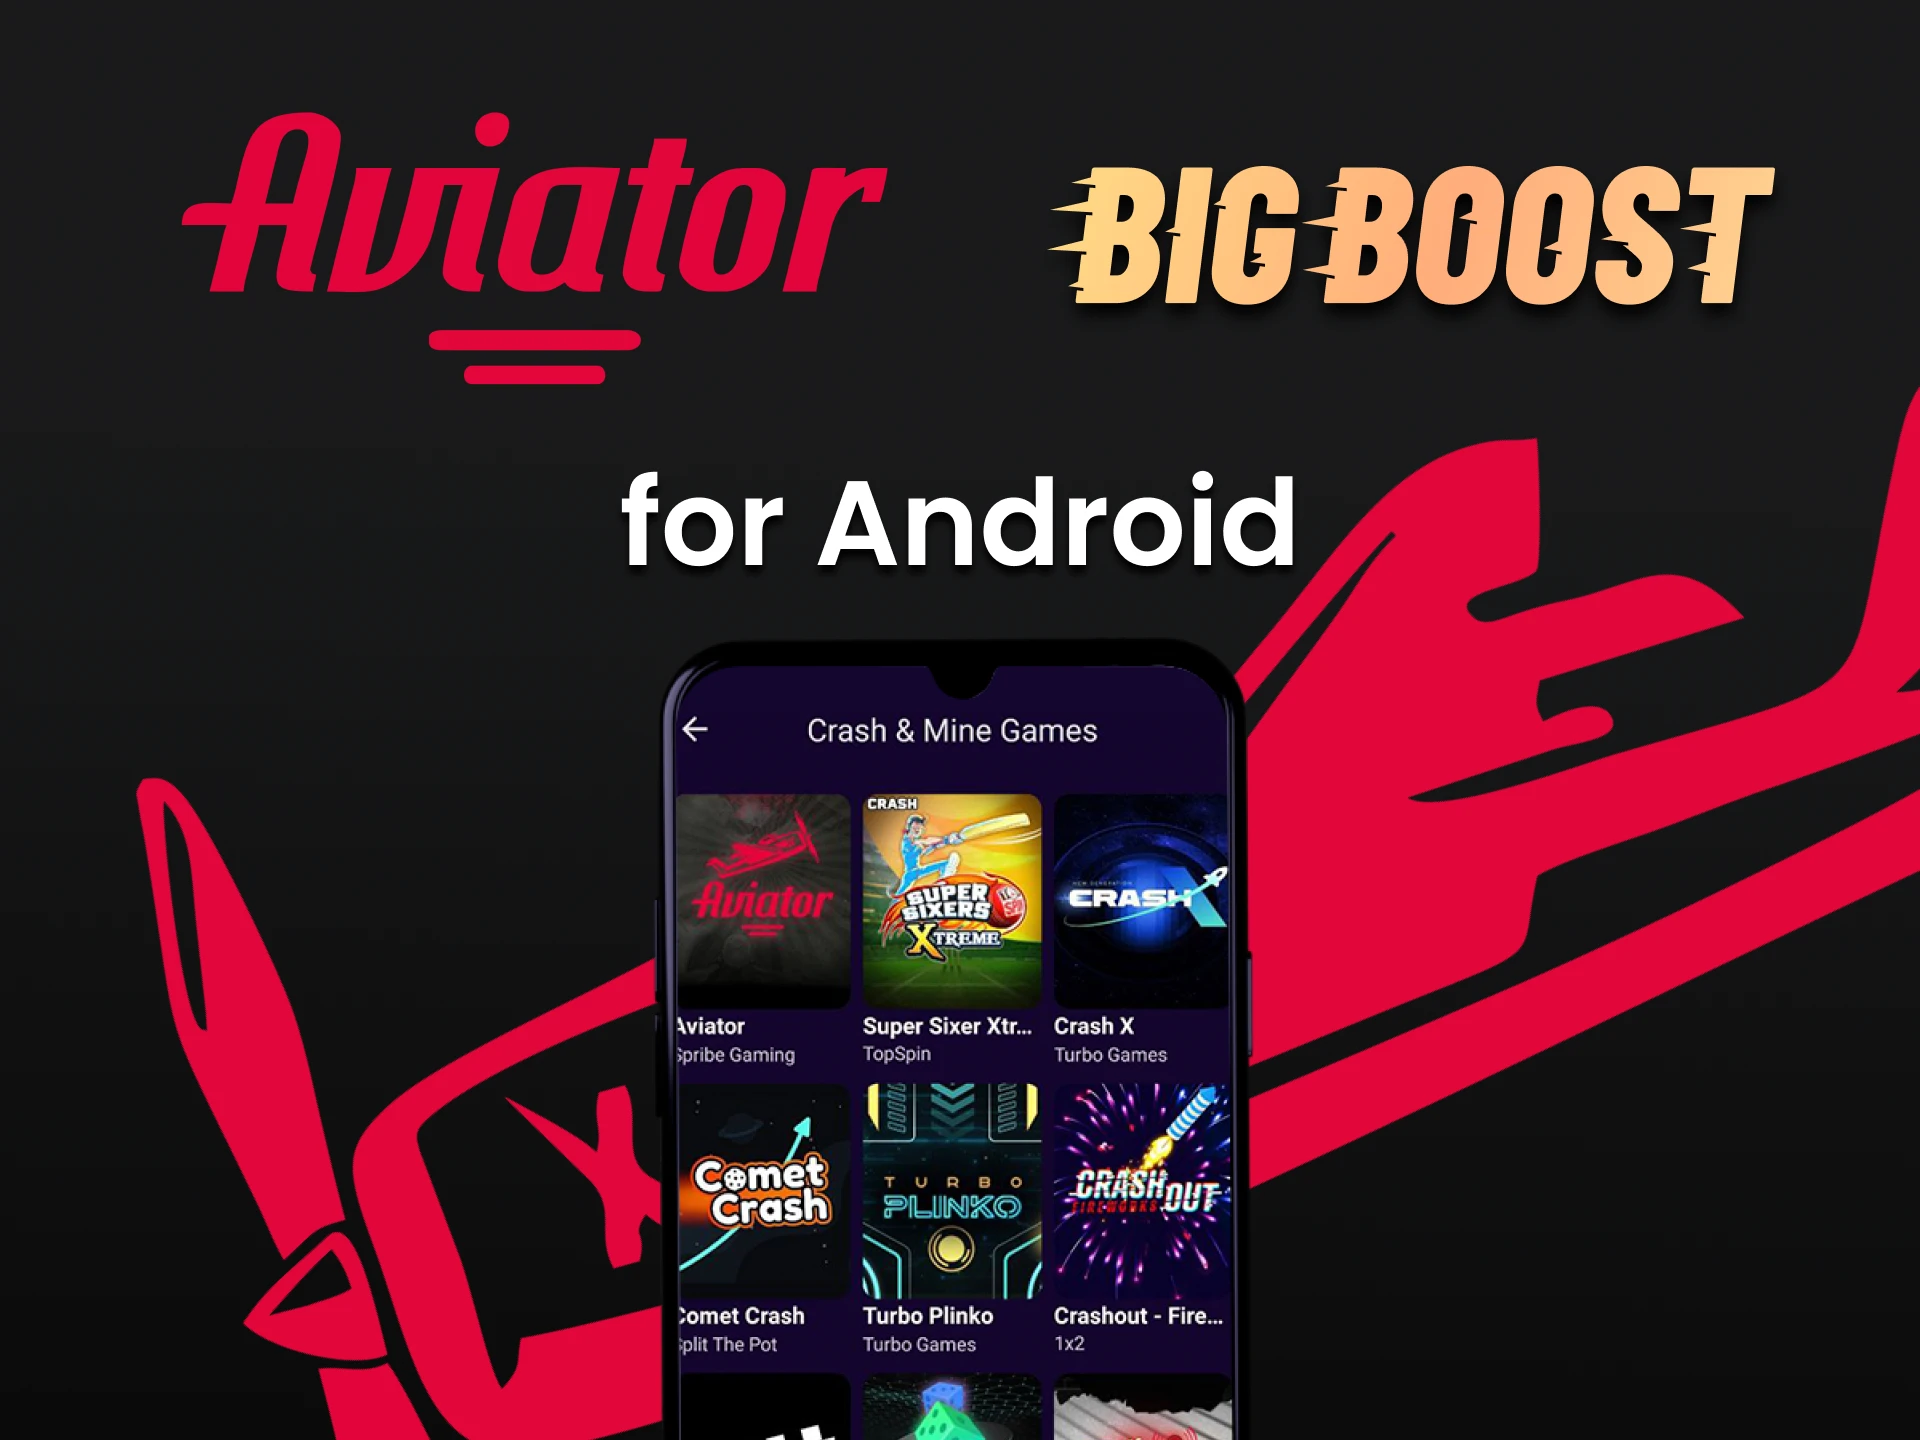 Play Aviator on the Big Boost Android app.